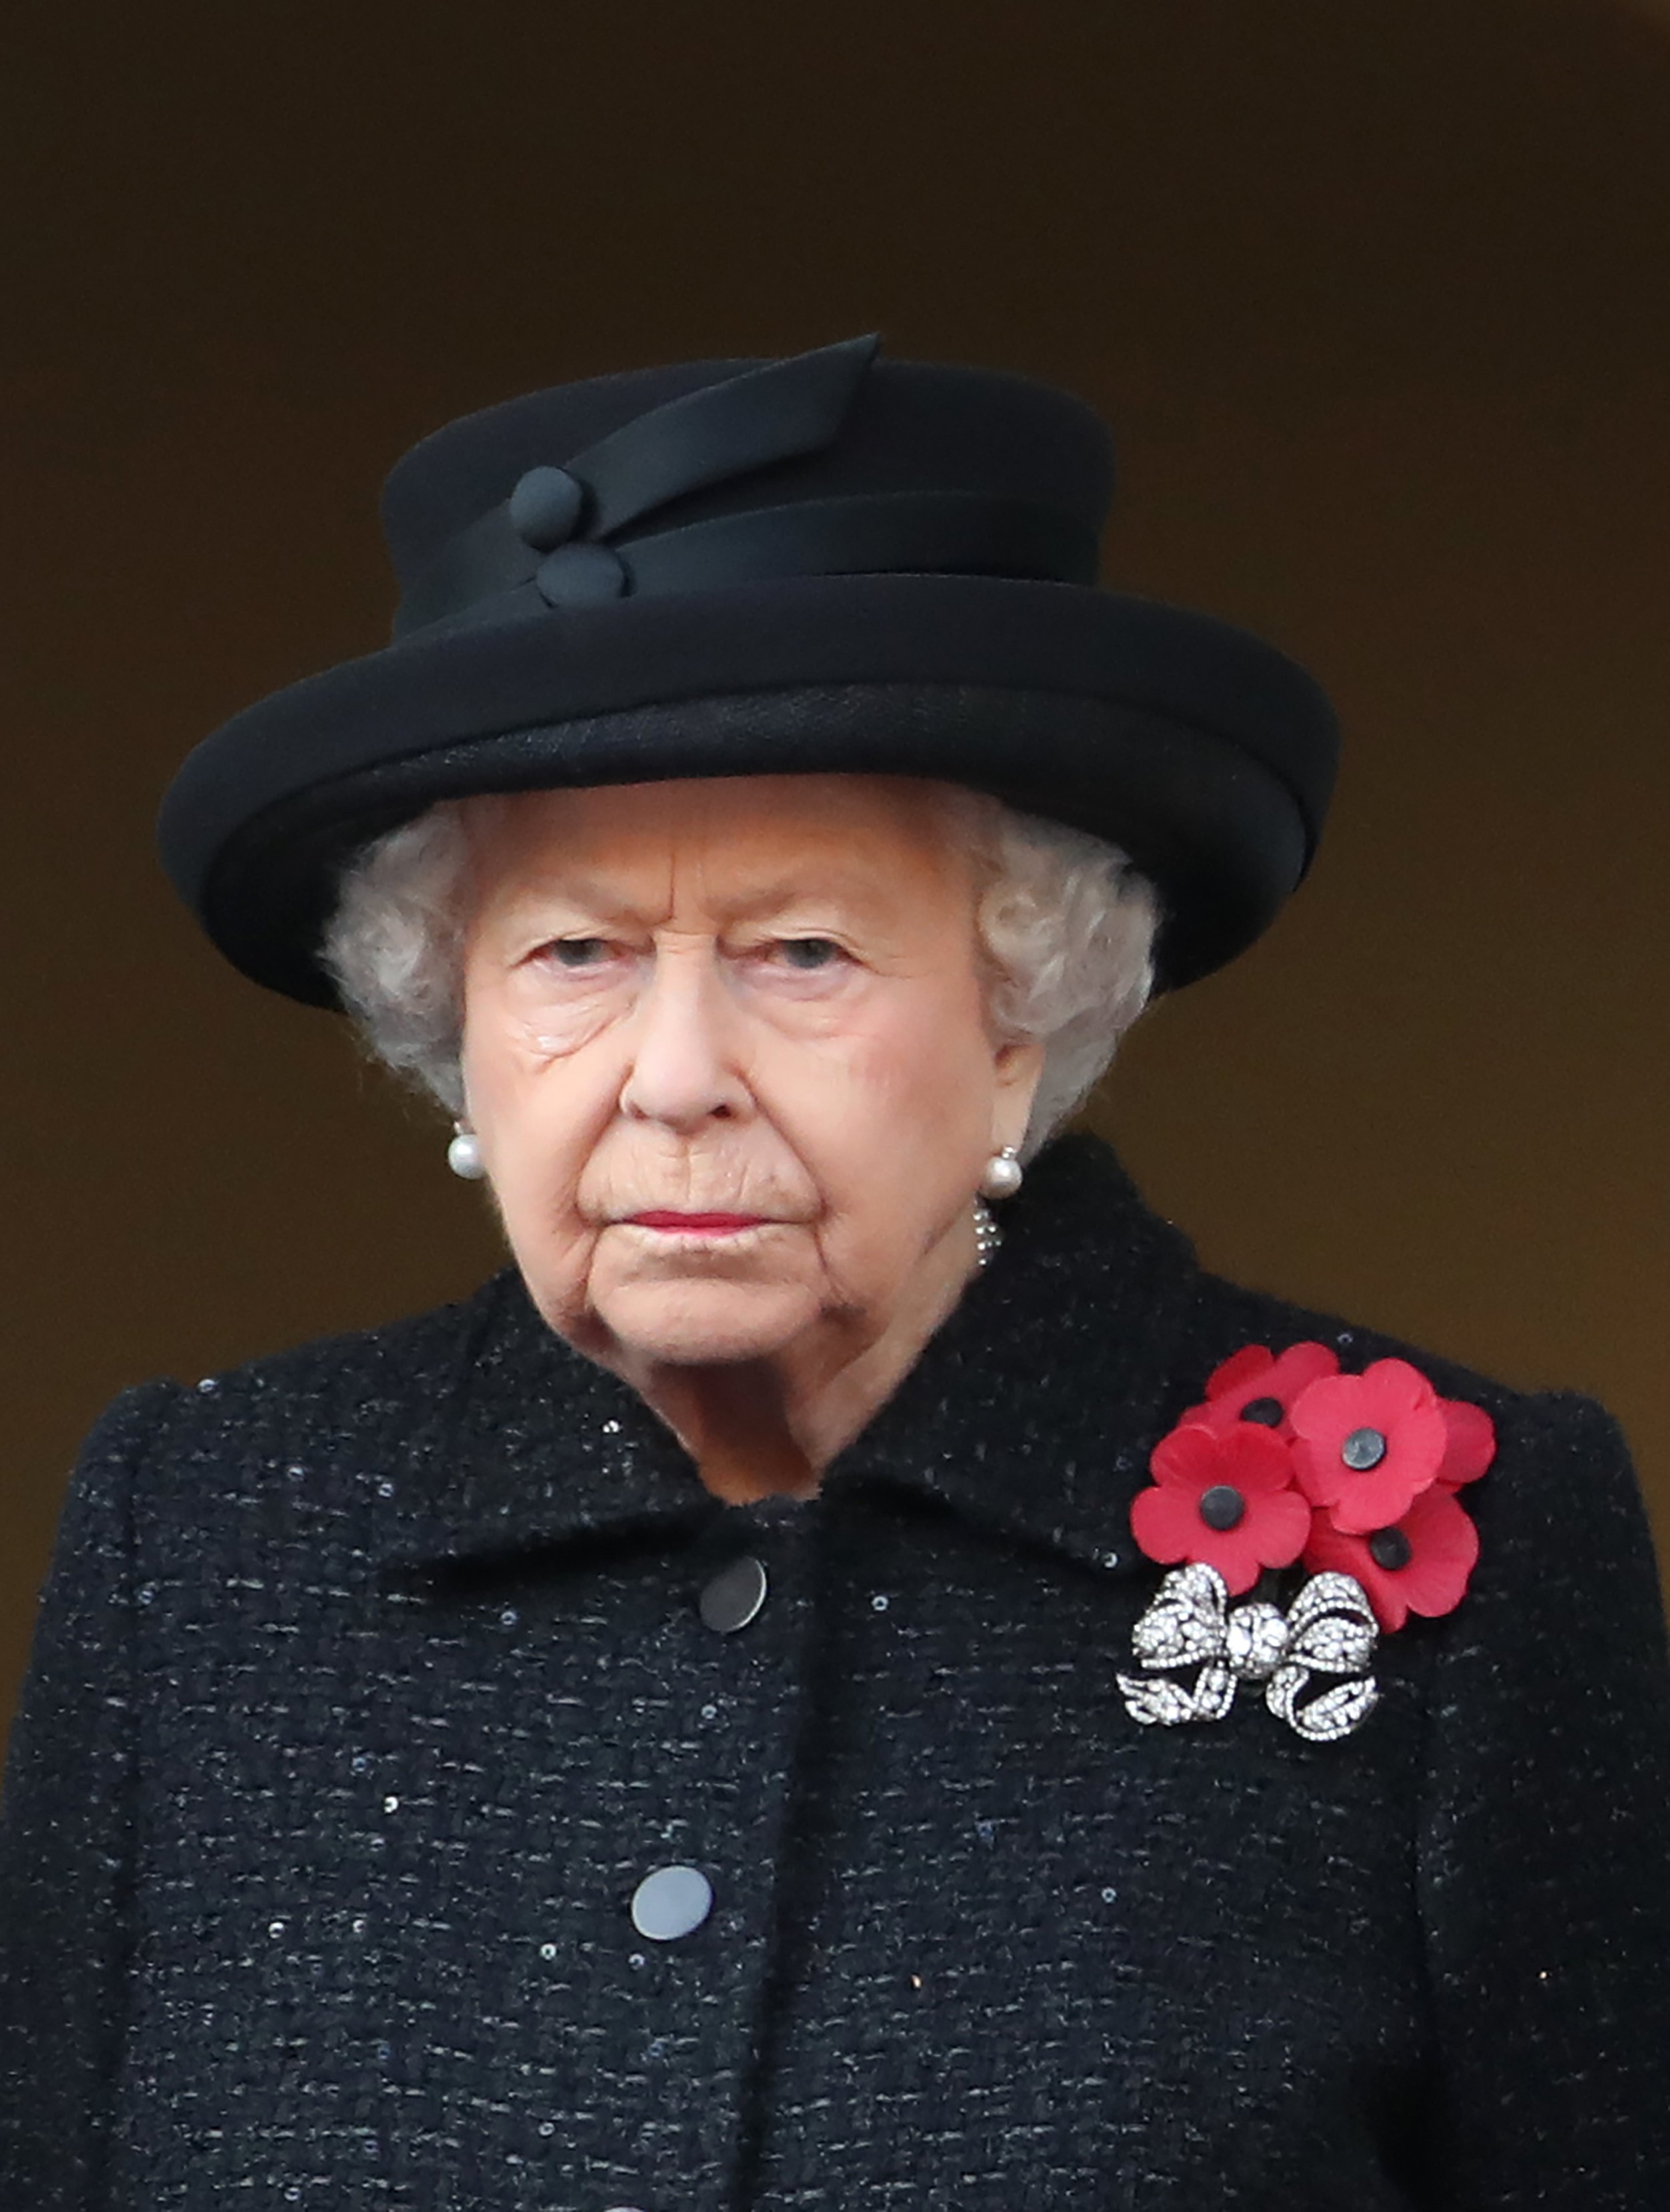 Queen Elizabeth II at the annual Remembrance Sunday memorial at The Cenotaph on November 10, 2019, in London, England | Photo: Getty Images